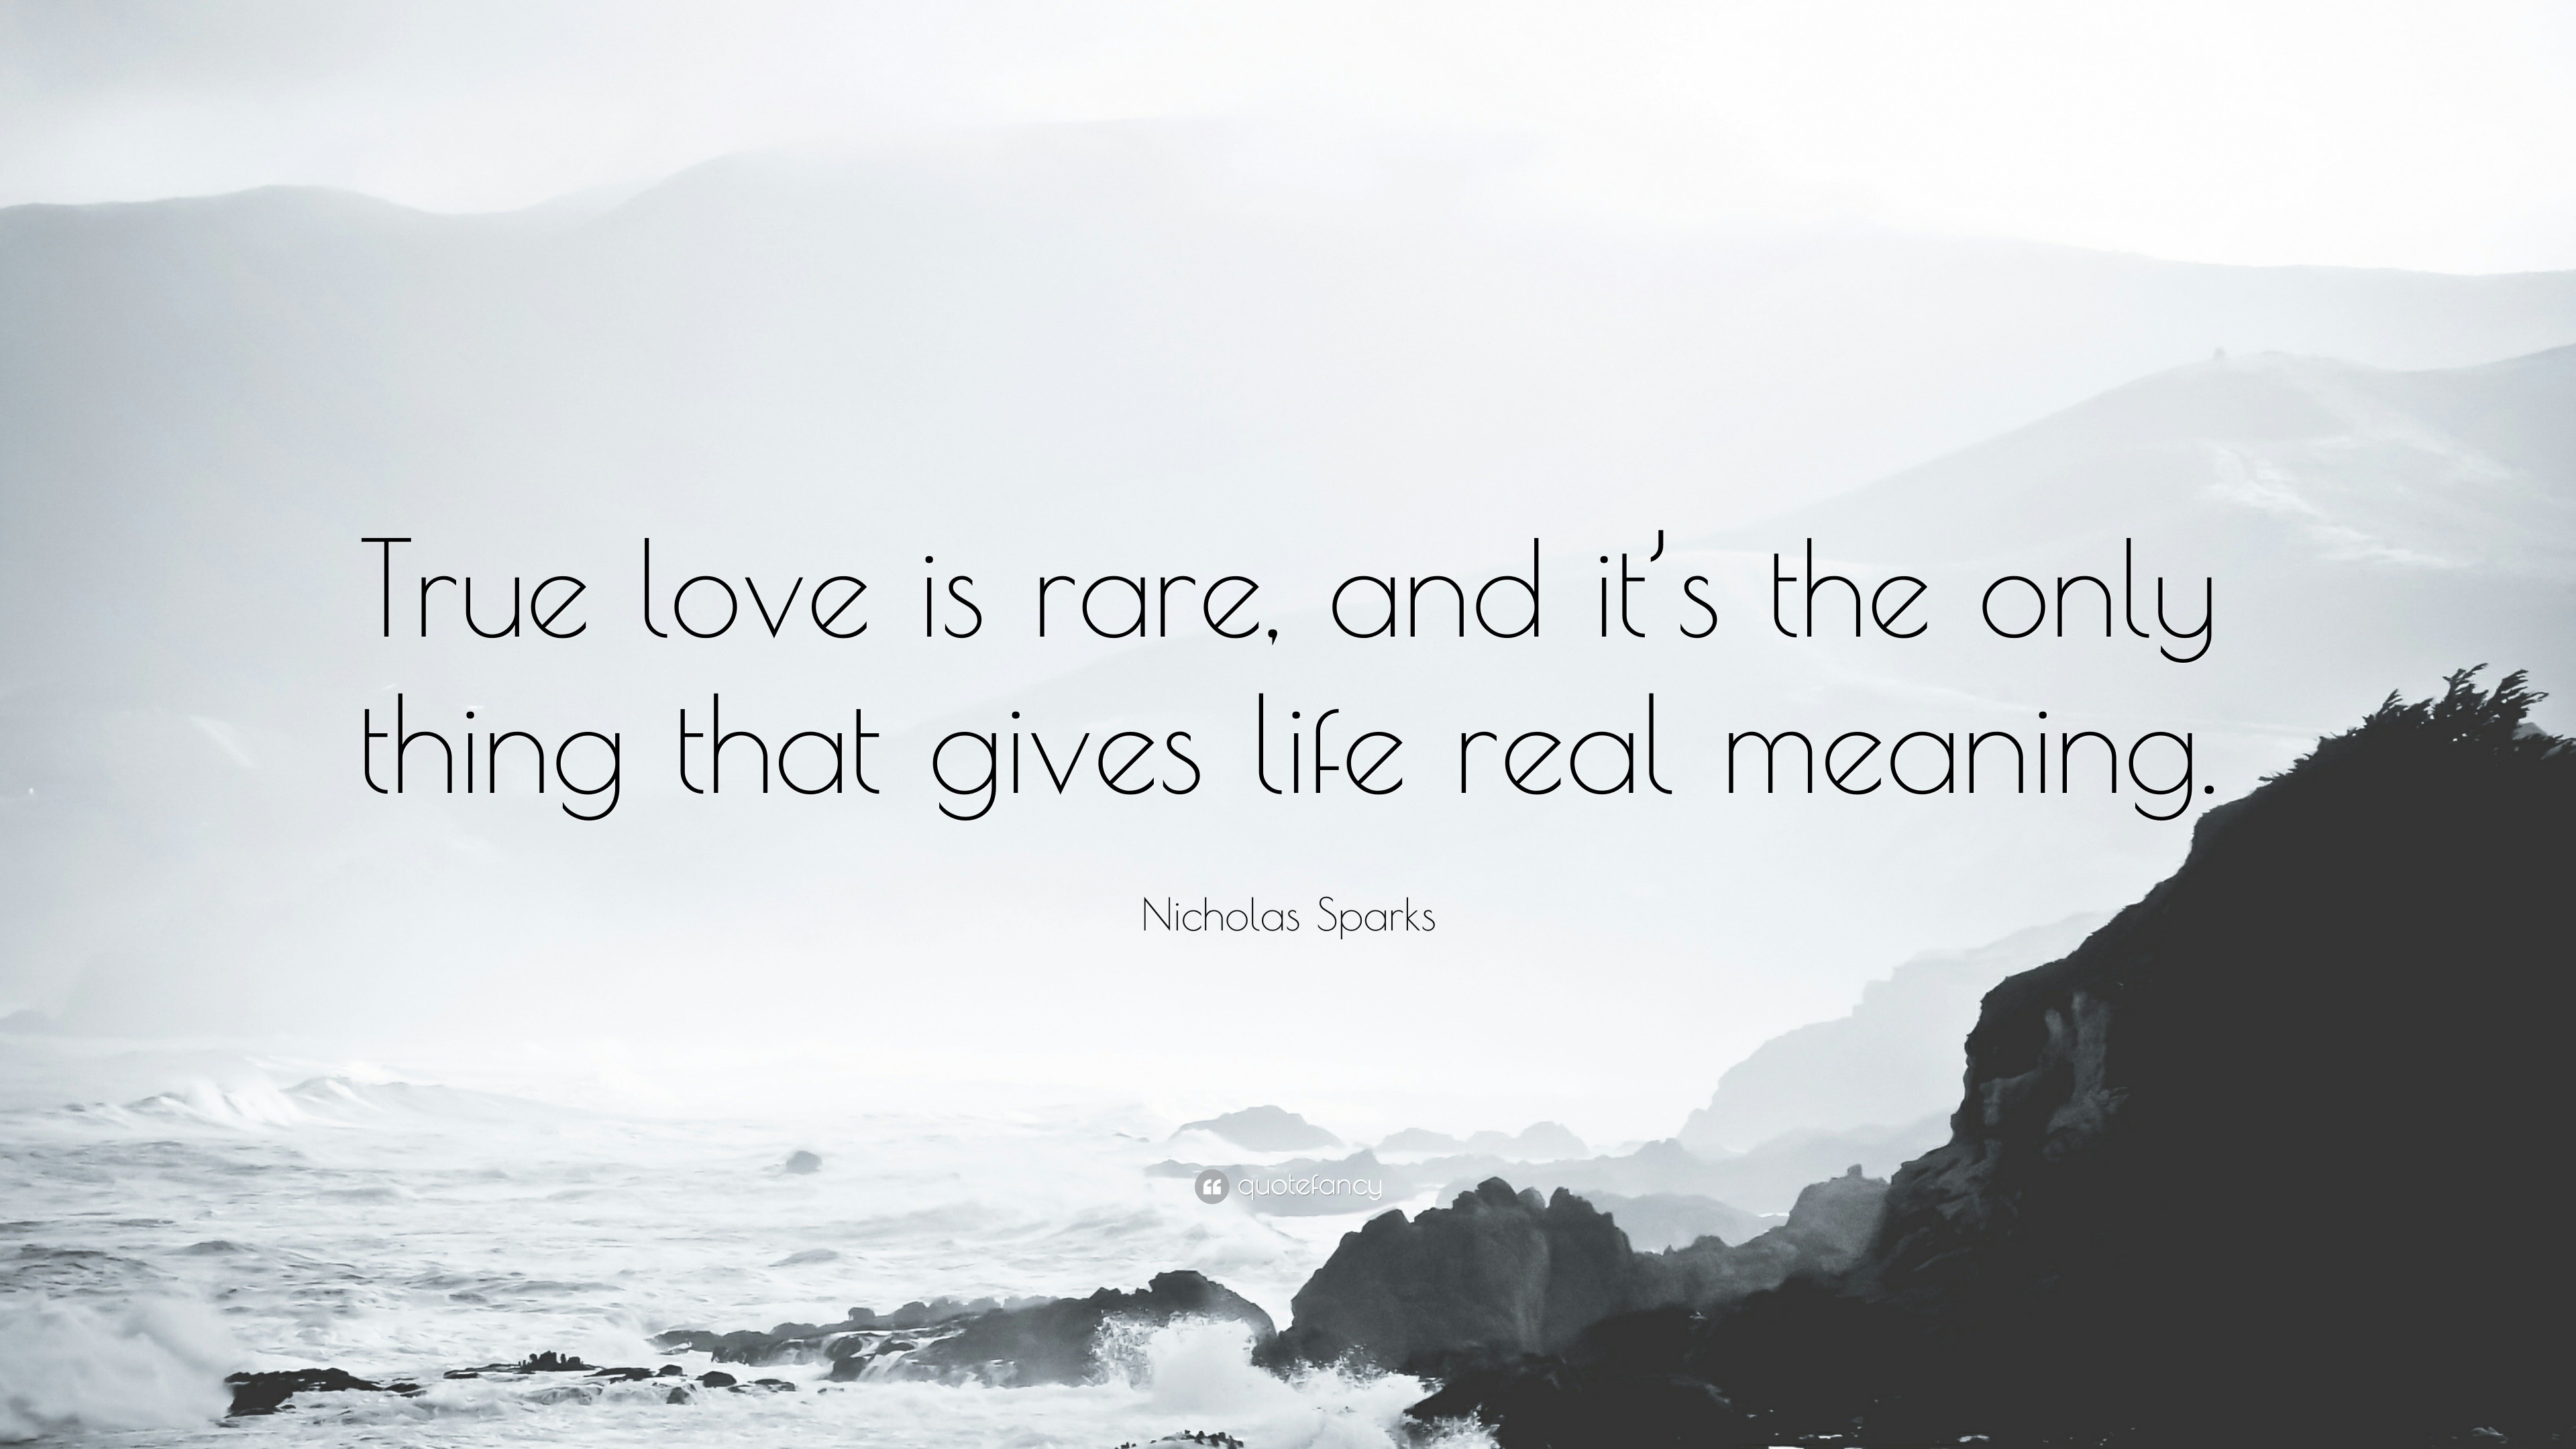 Why Is Real Love So Rare?